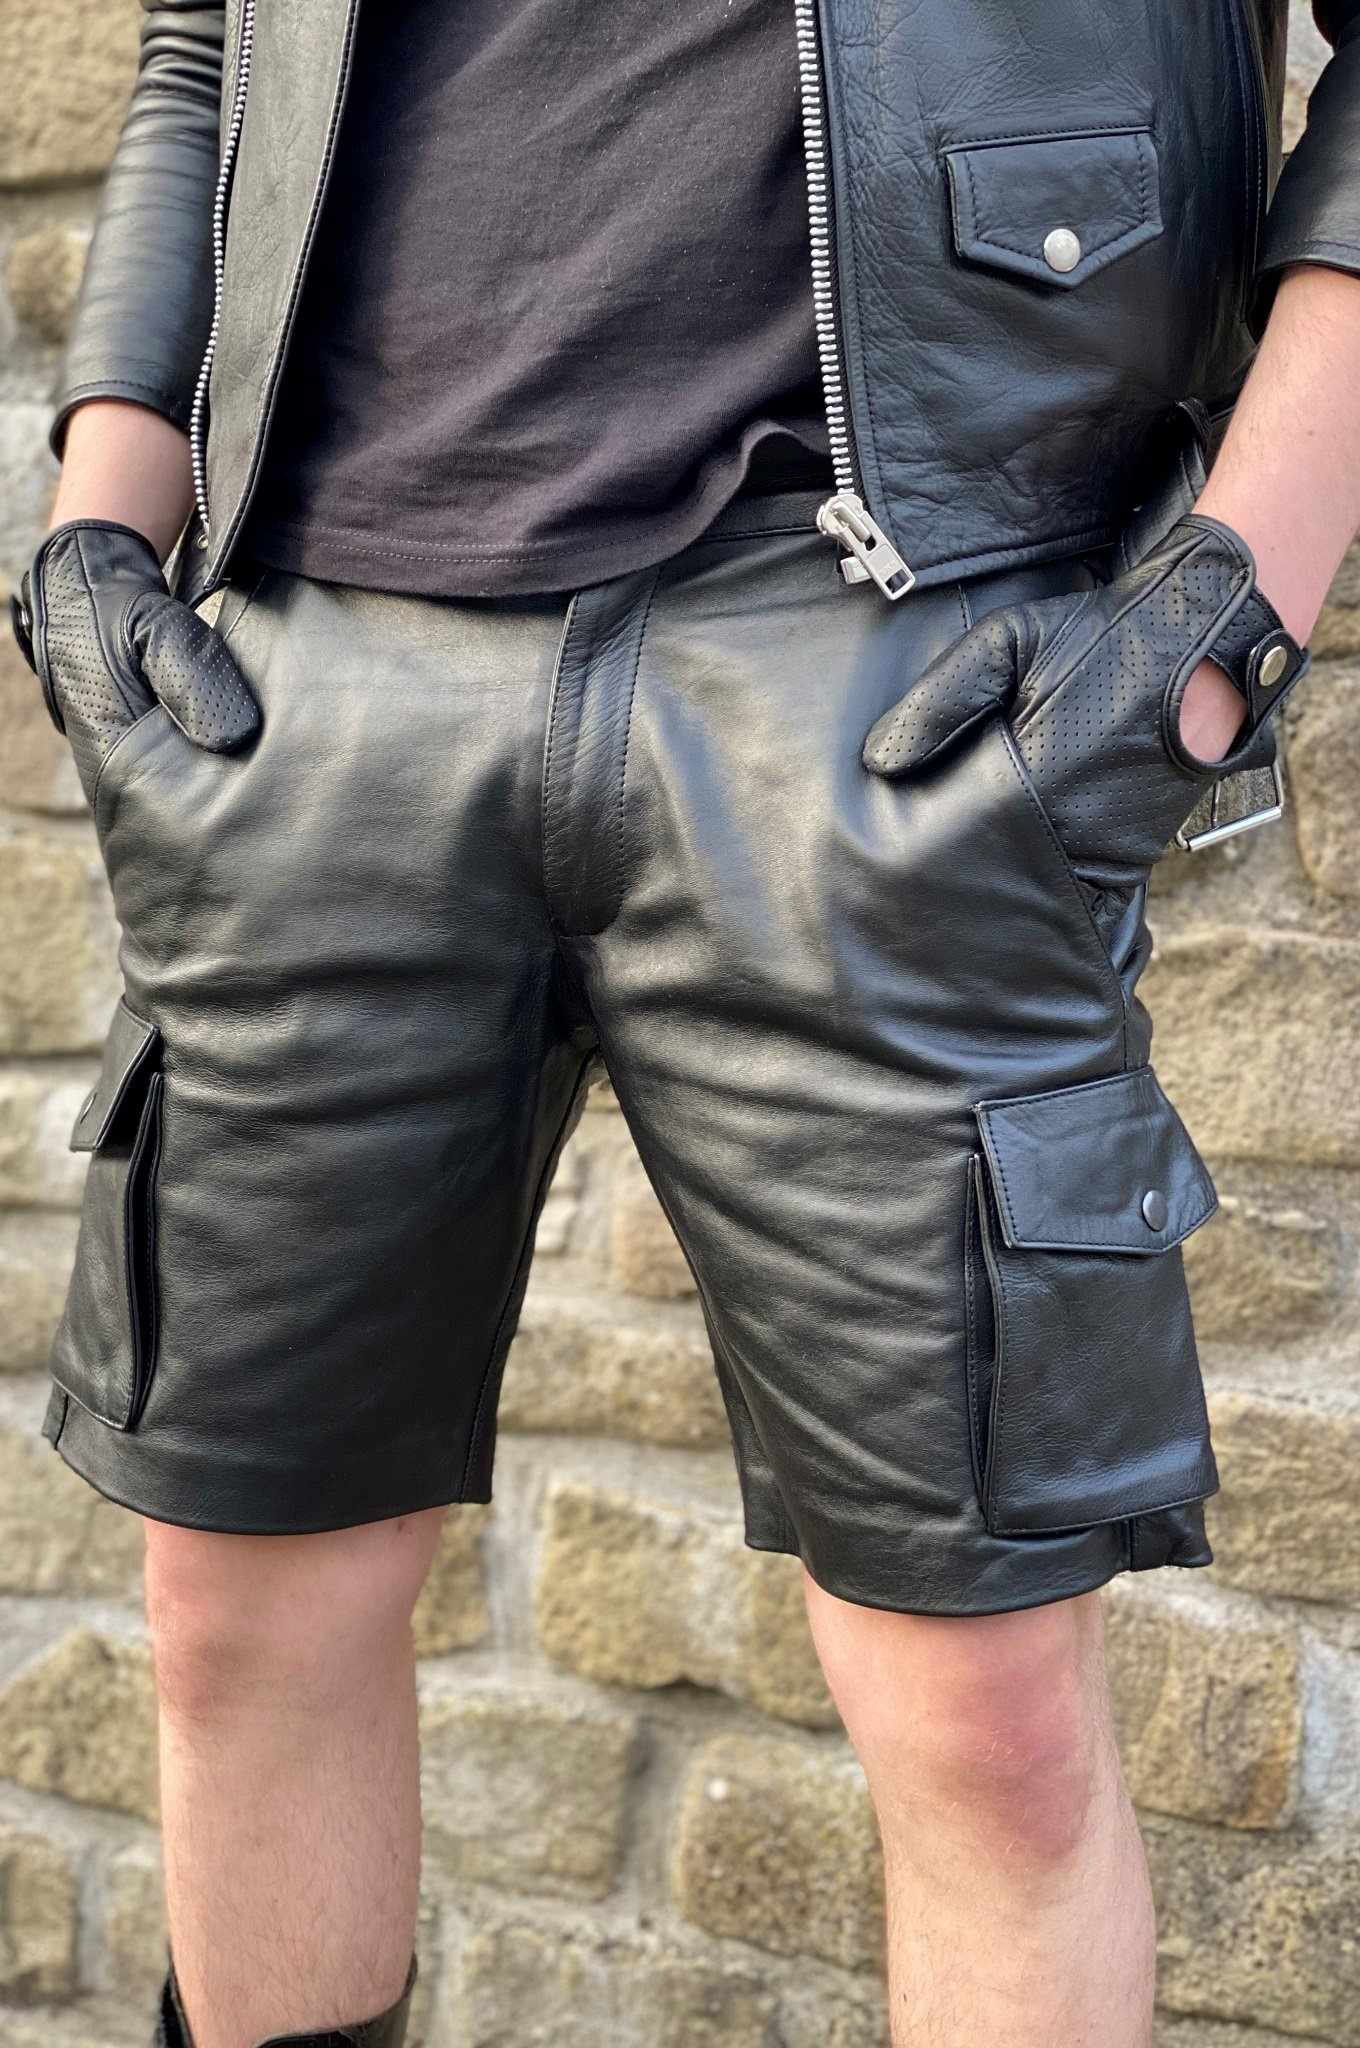 Leather Mens Tank Top With Hood + Sexy Shorts – Queer In The World